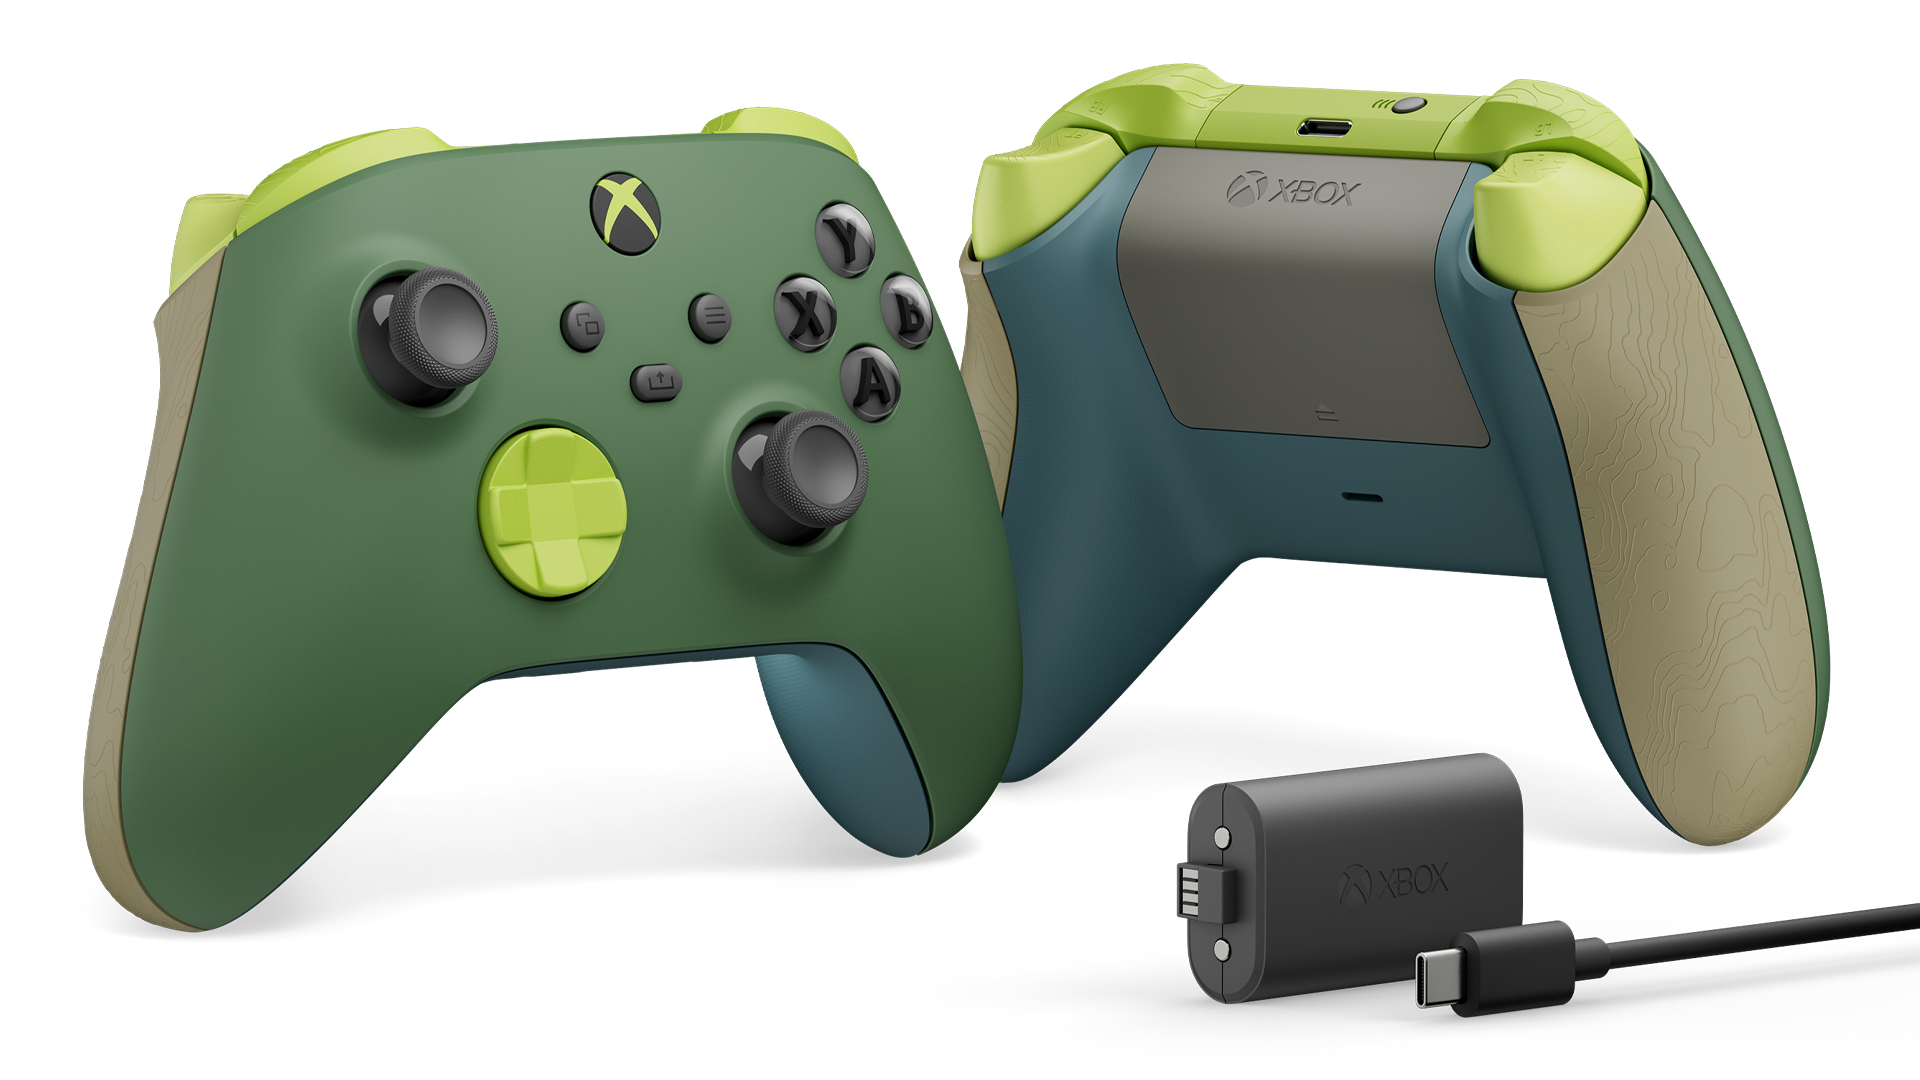 Microsoft reveals 'extremely limited edition' Xbox joins Bethesda  controller set